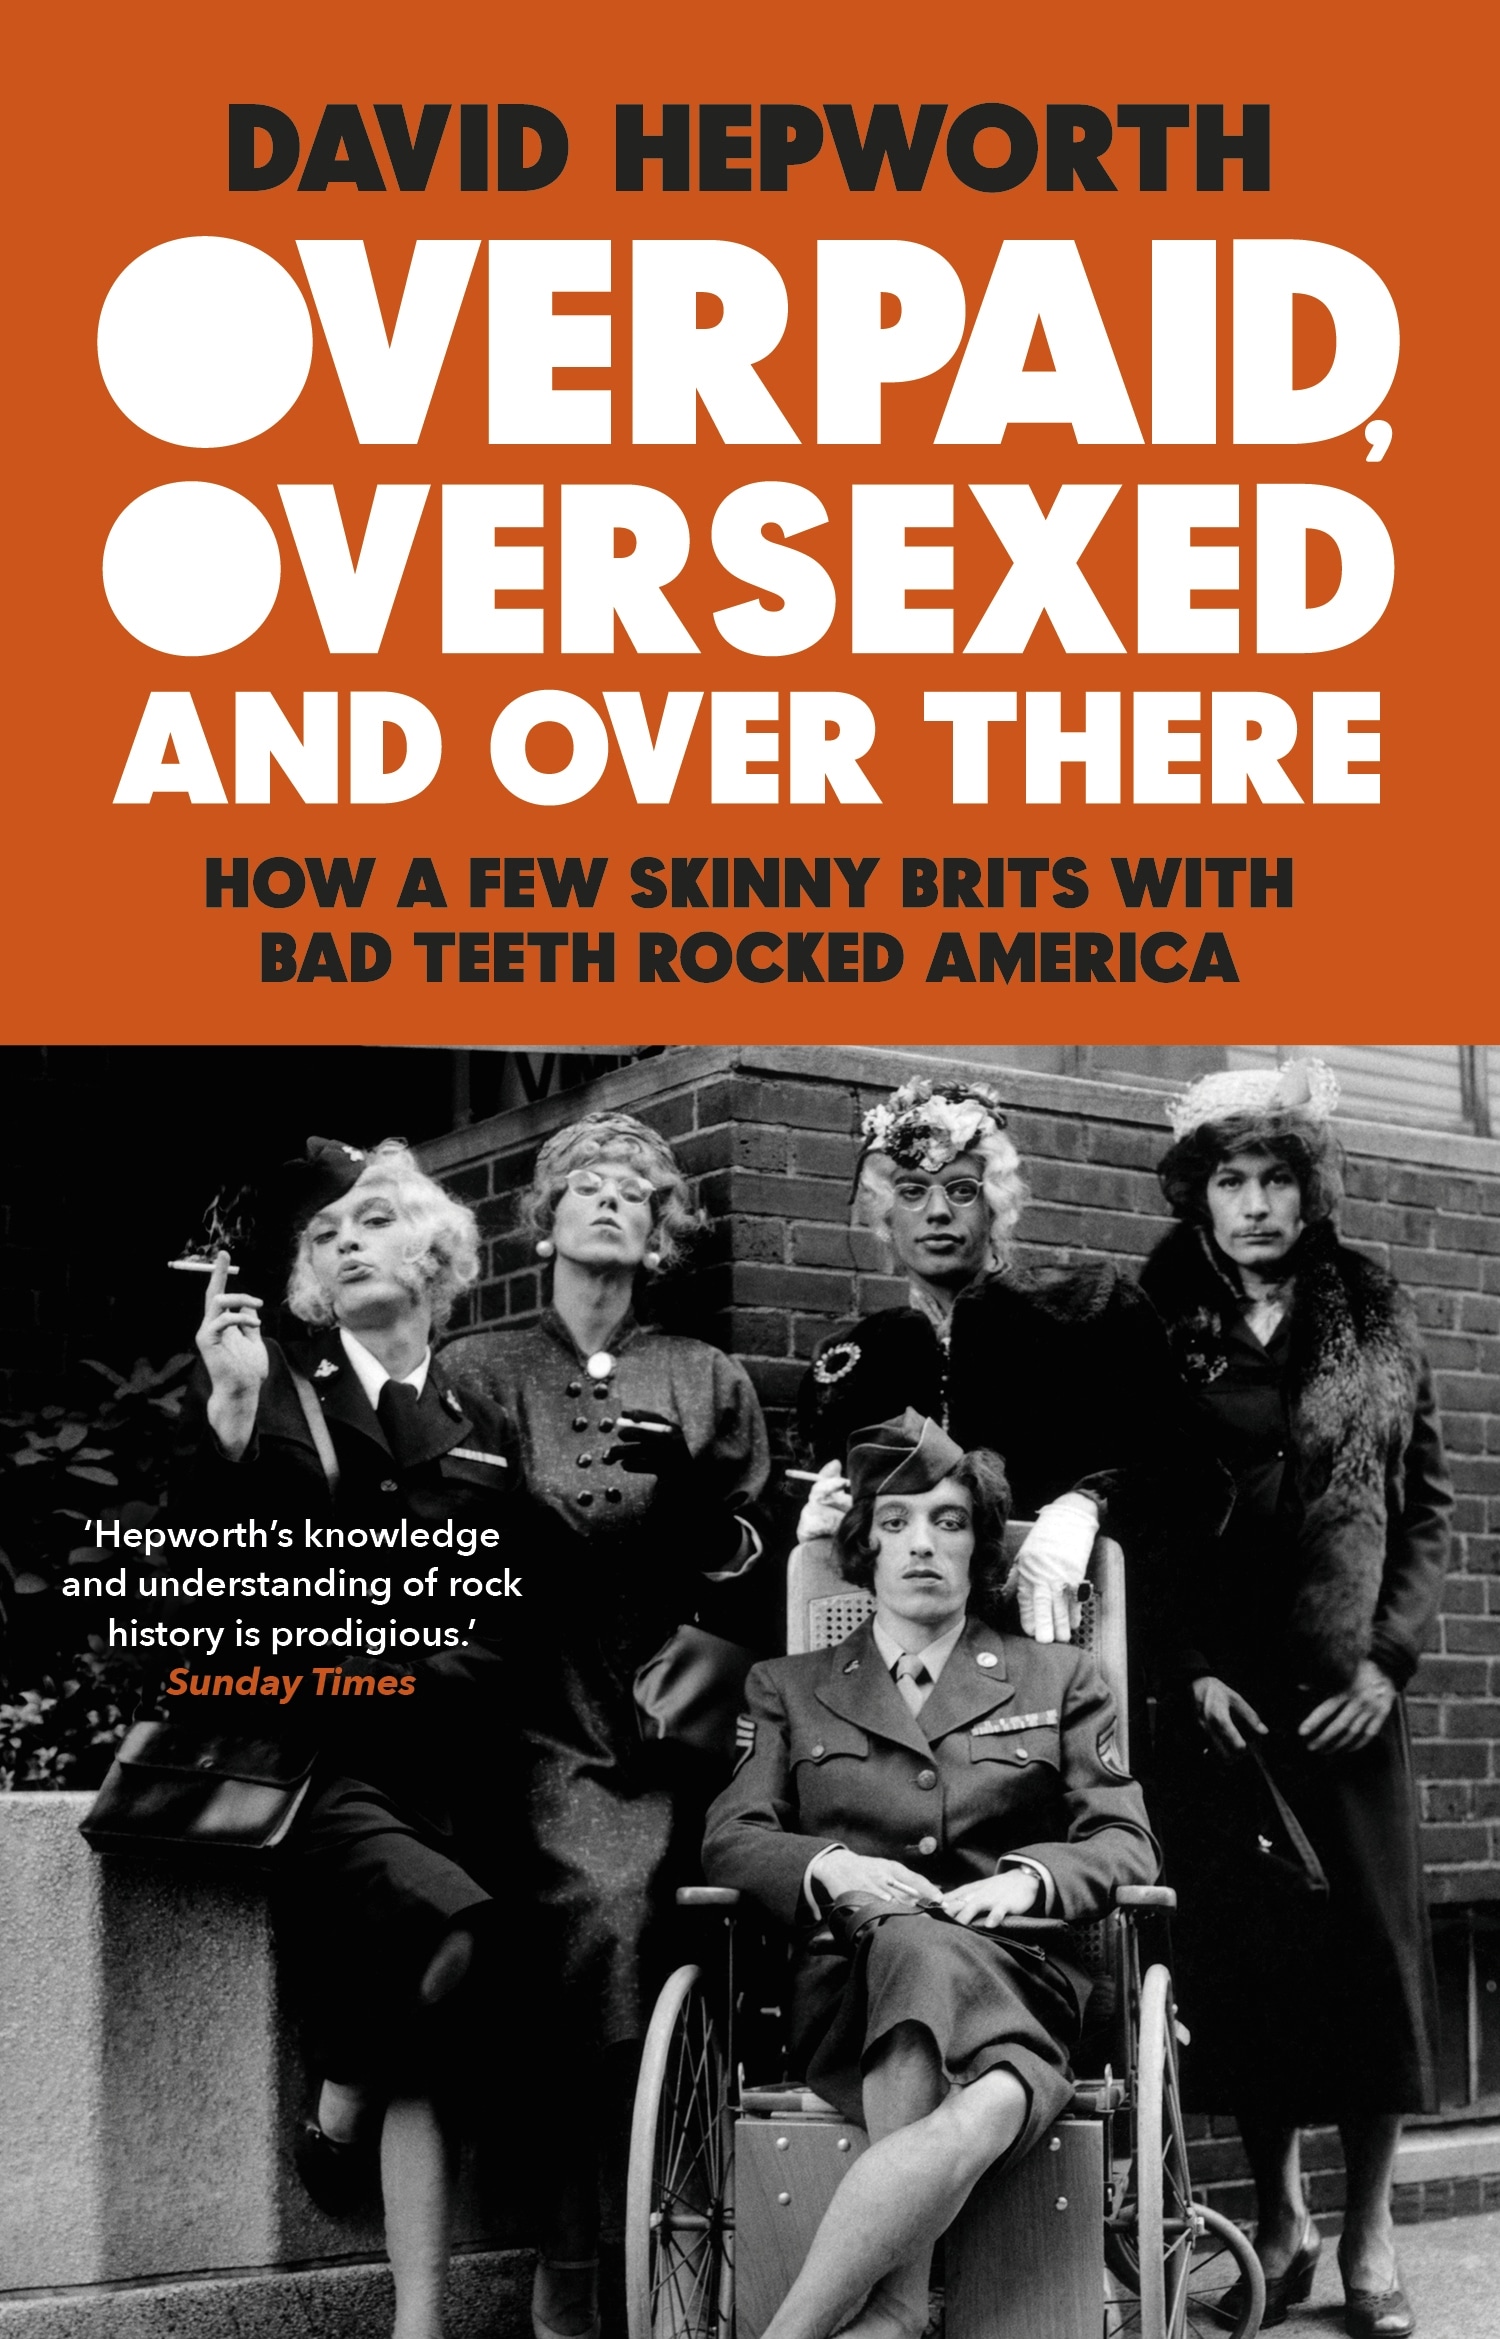 Book “Overpaid, Oversexed and Over There” by David Hepworth — September 9, 2021